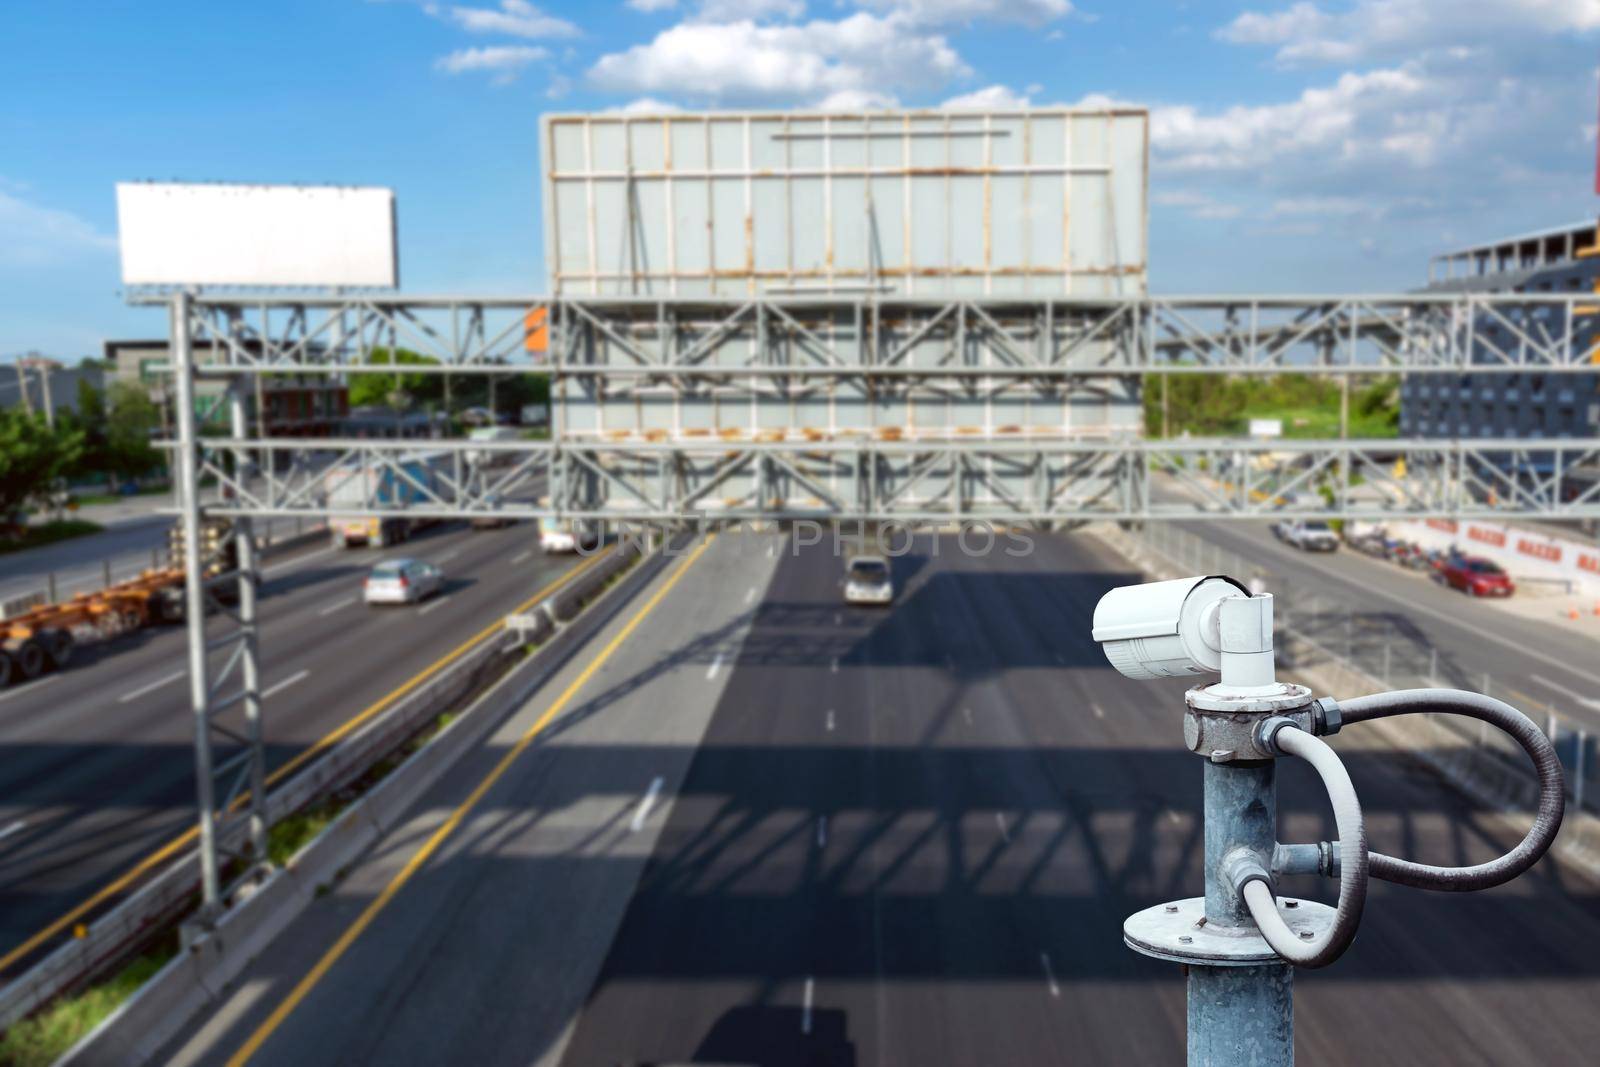 CCTV cameras on the overpass for recording on the road for safety and traffic violations.